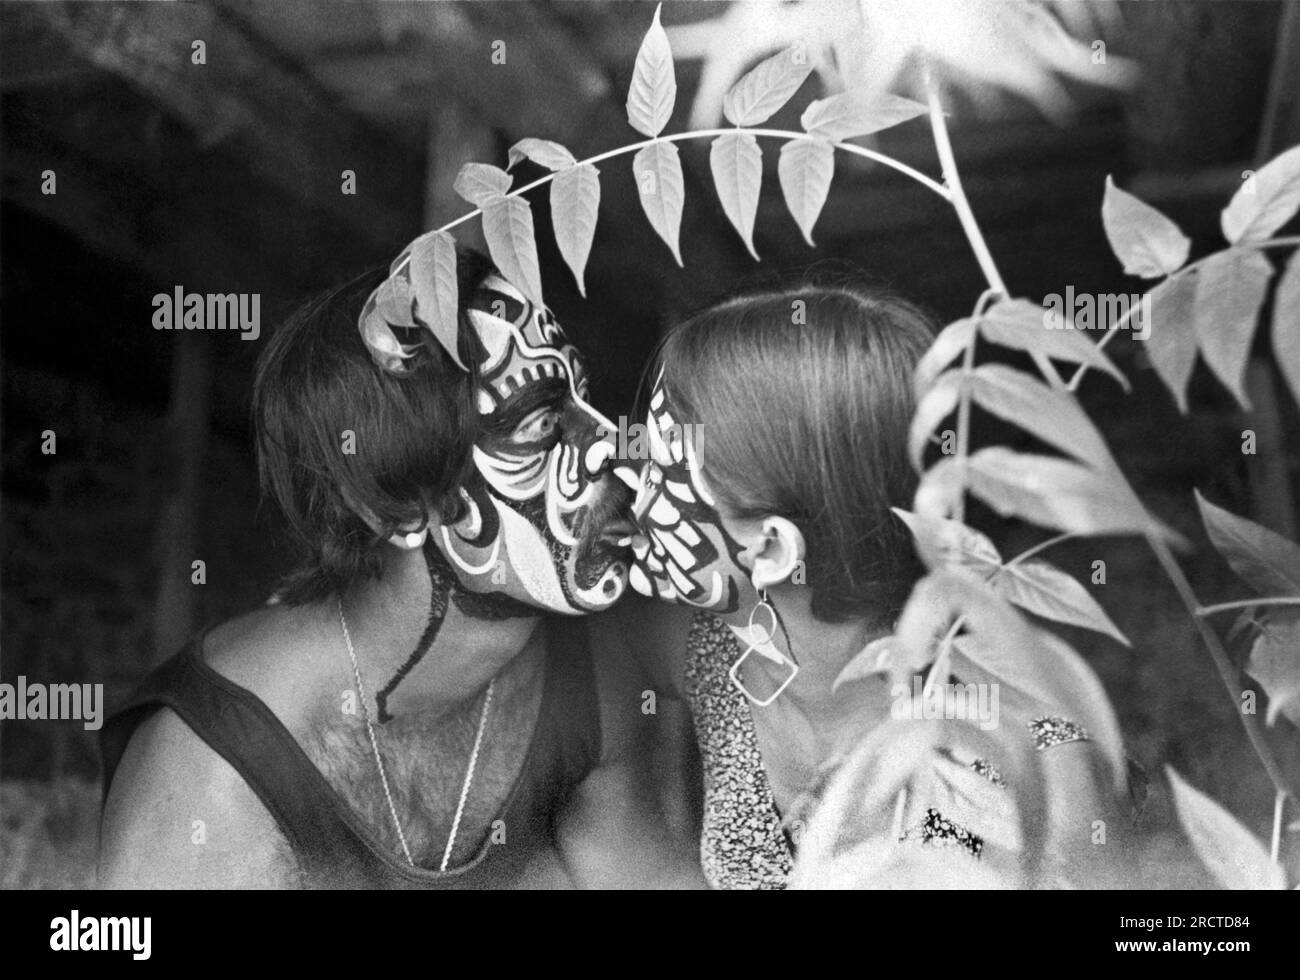 California:  c. 1969. A couple with painted faces touch tongues in the shrubbery. Stock Photo